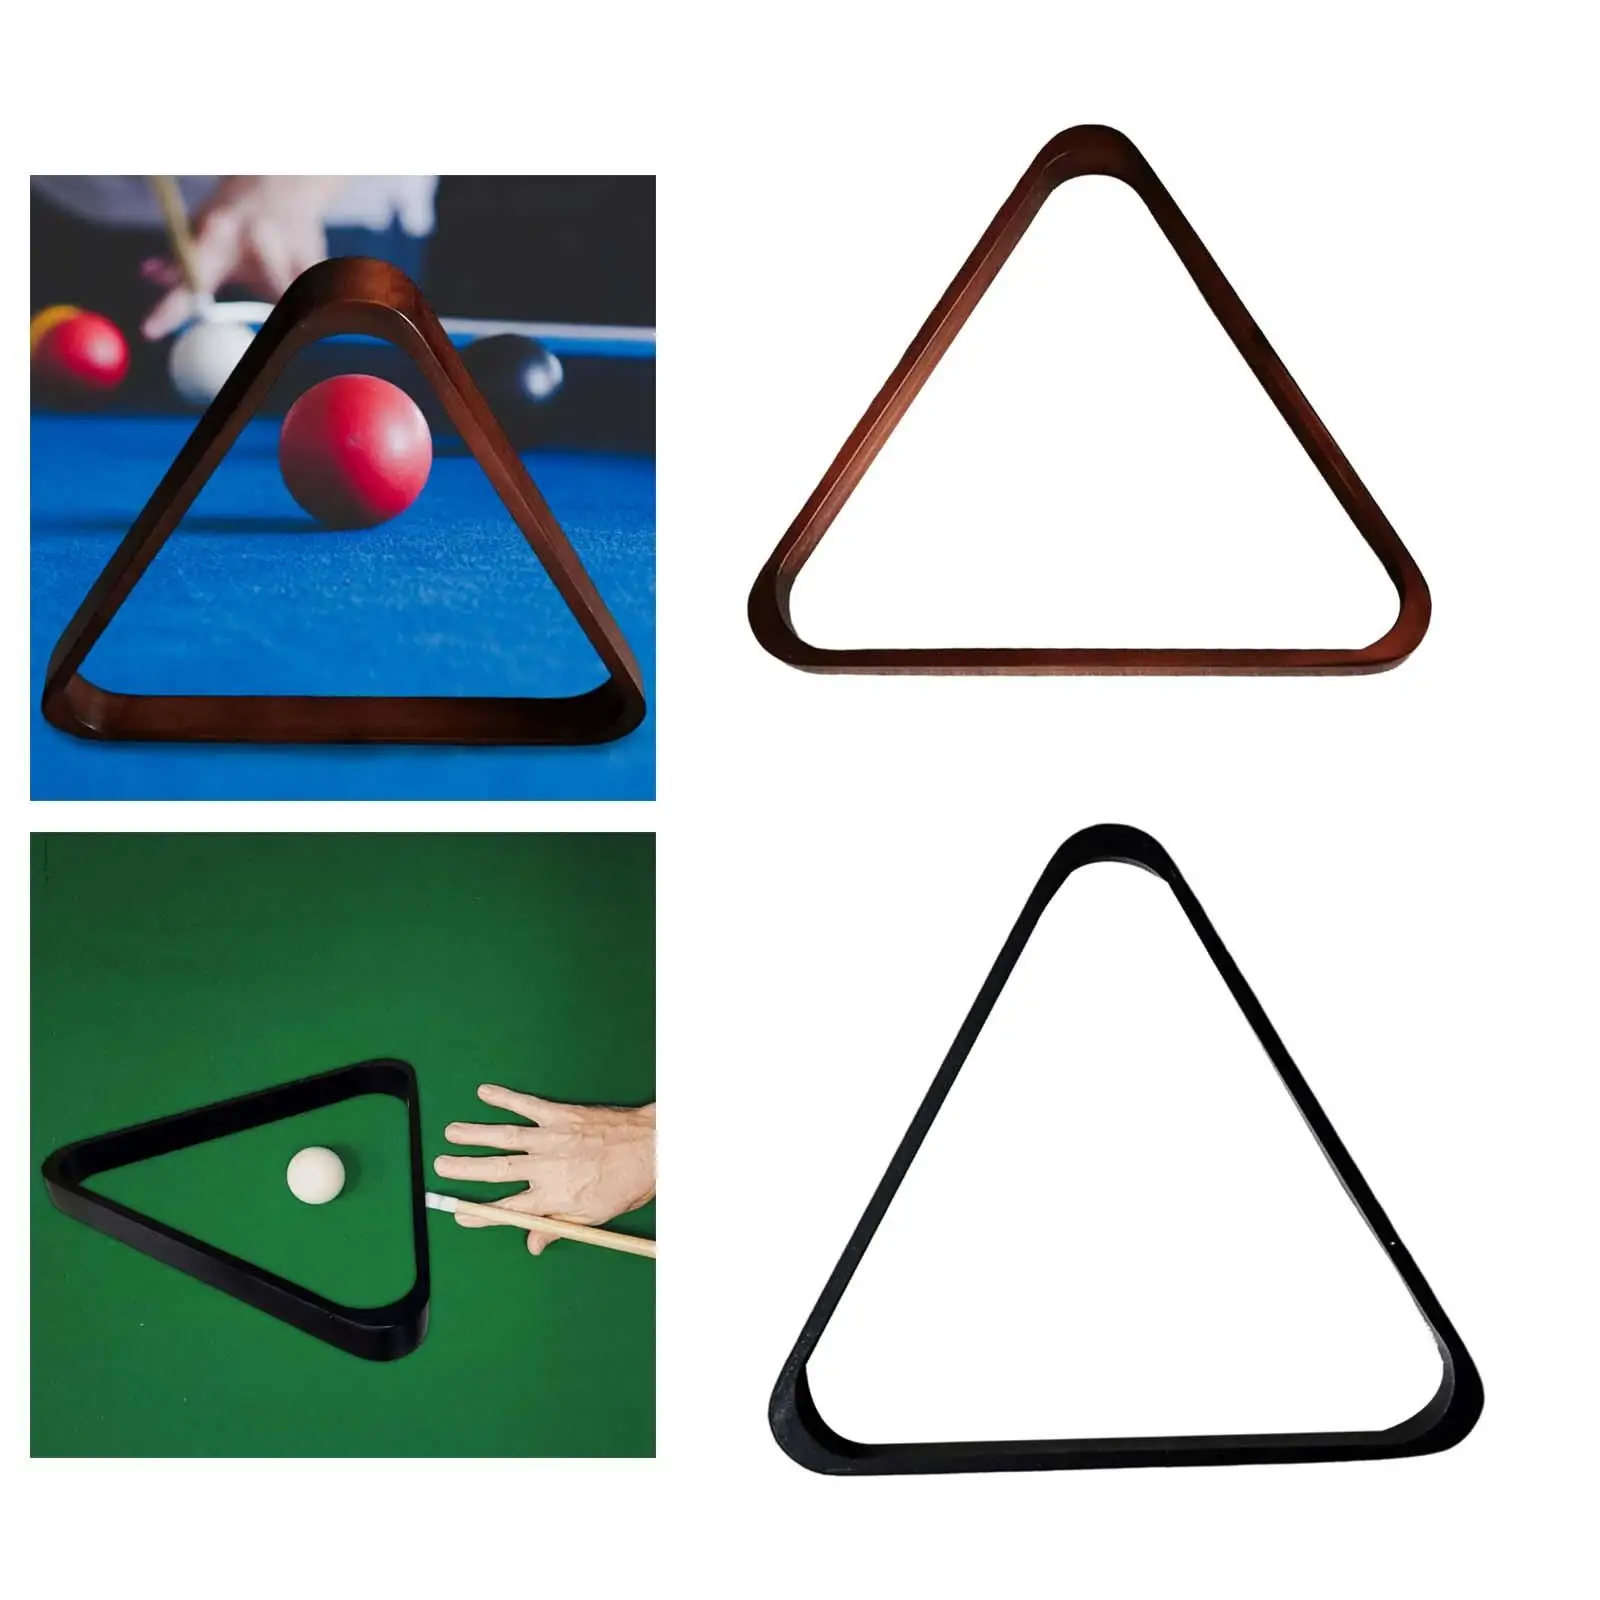 Flat Billiard Triangle Rack Supplies Table Rack Accessories Tripod Pool 8 Balls Ball Holder for Sports Snooker Positioning